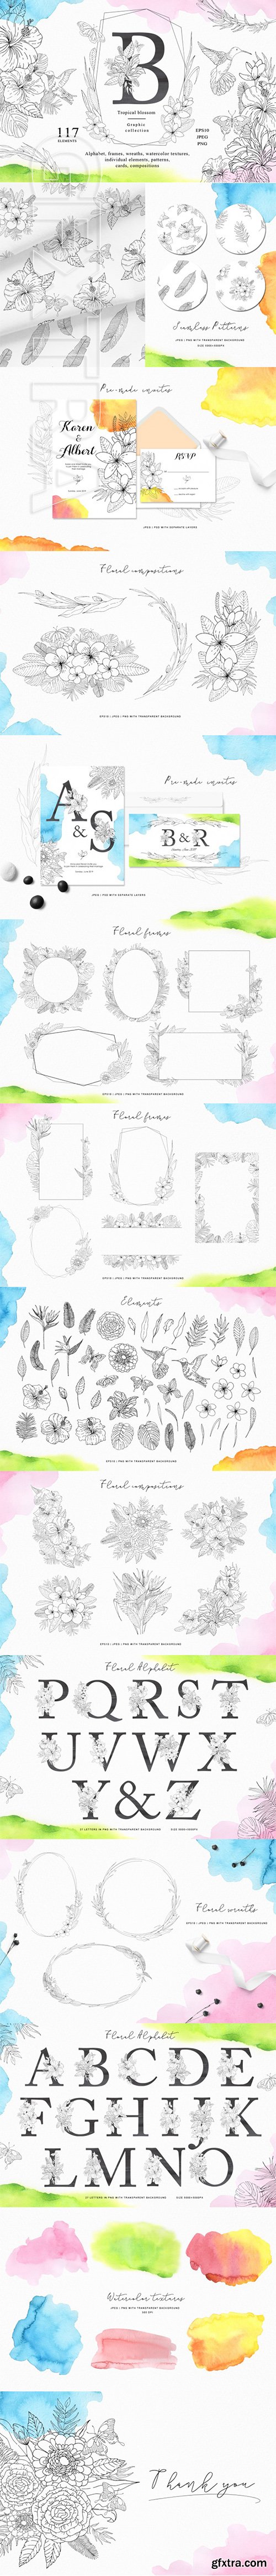 Tropical blossom graphic collection